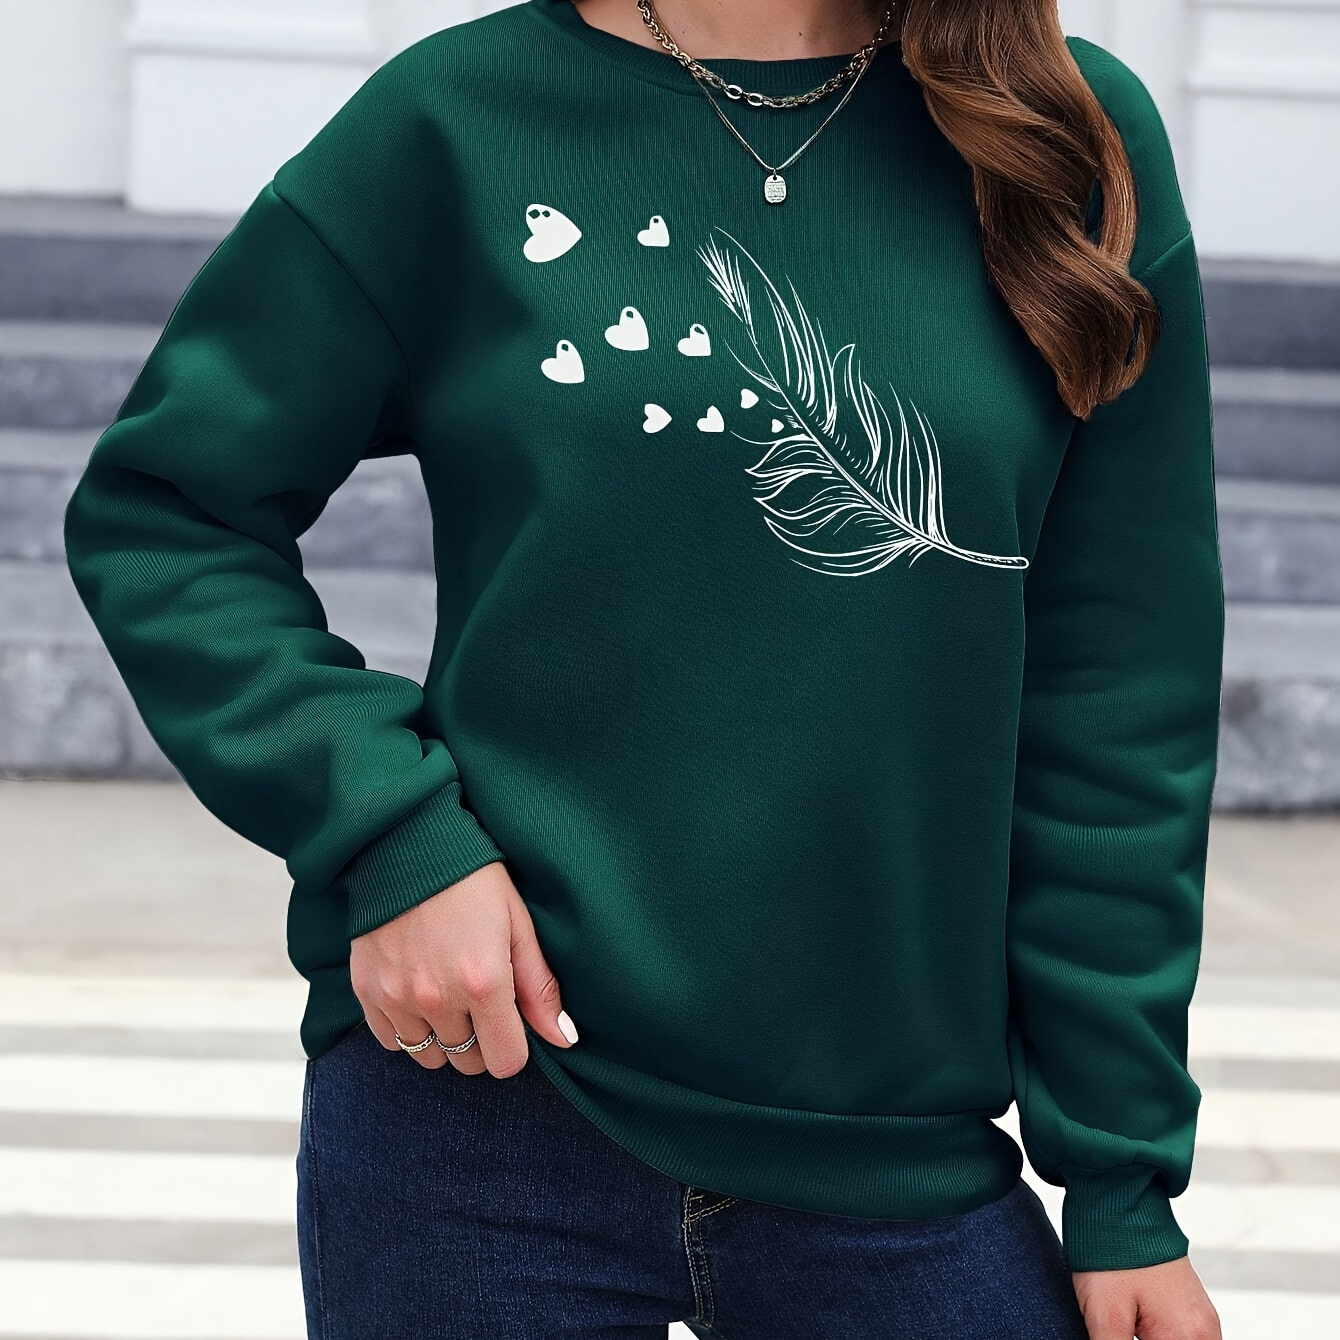 

Women's Fashion Pullover Sweatshirt, Casual Fleece-lined Athletic Top With Crew Neck, Feather Graphic Sportswear Outerwear